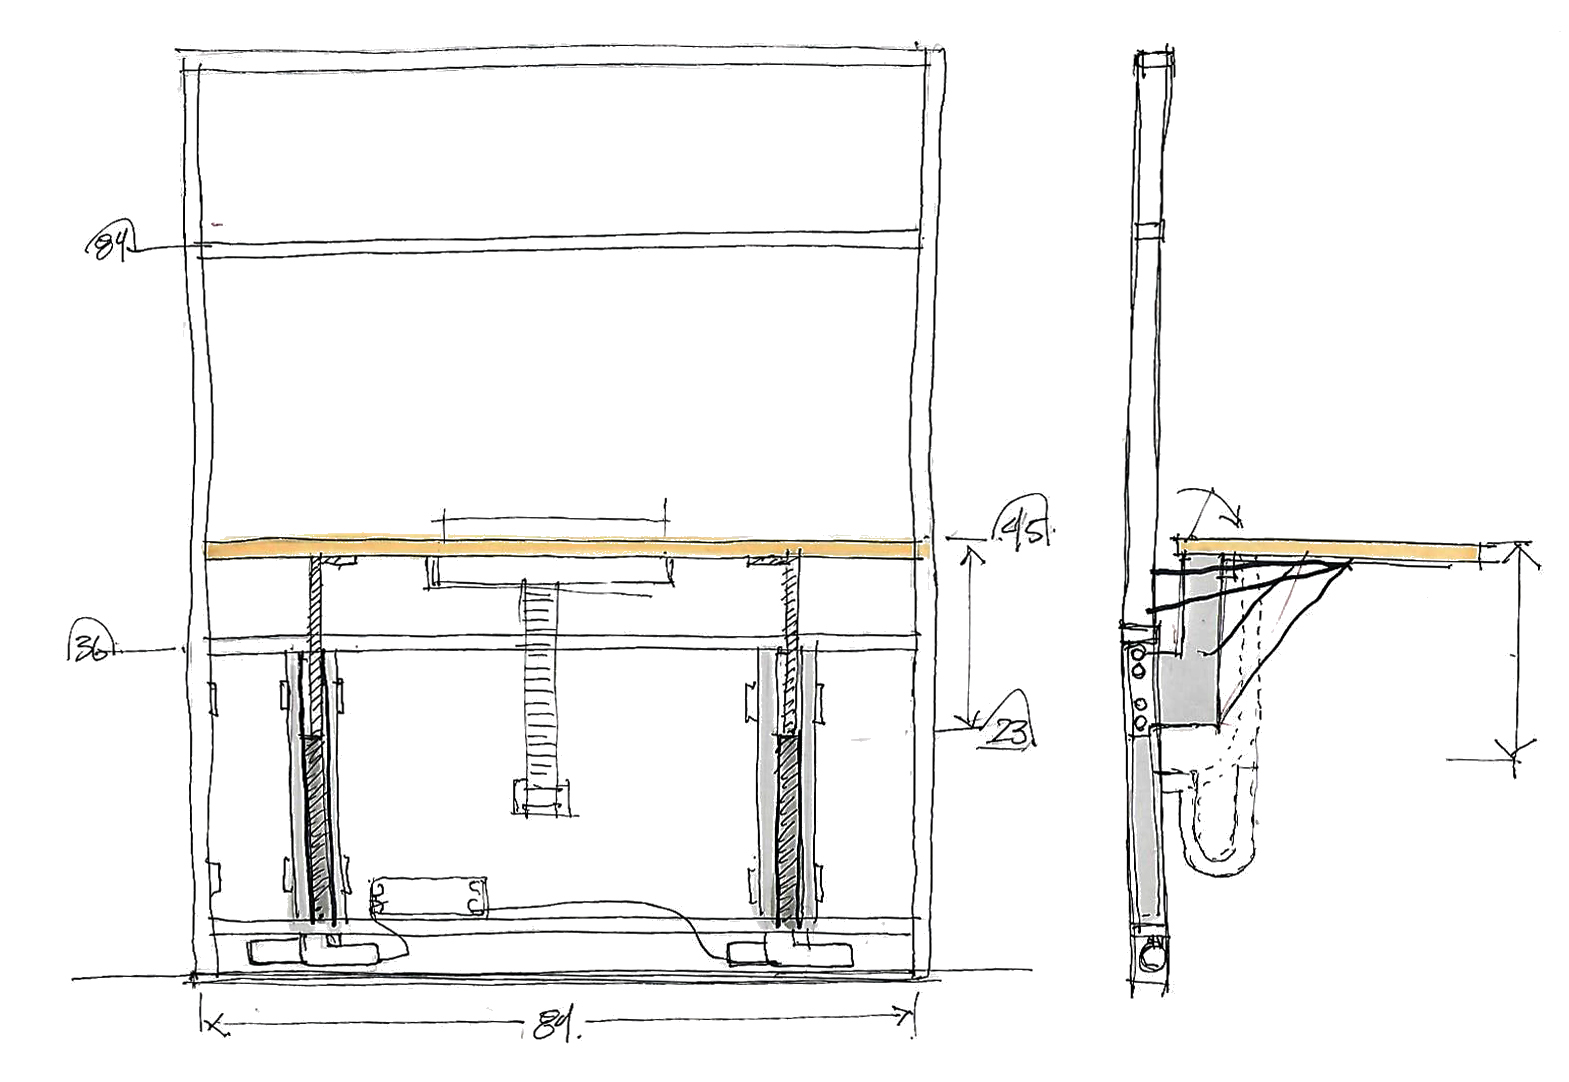  Sketch evaluating sit-stand dimensions. 